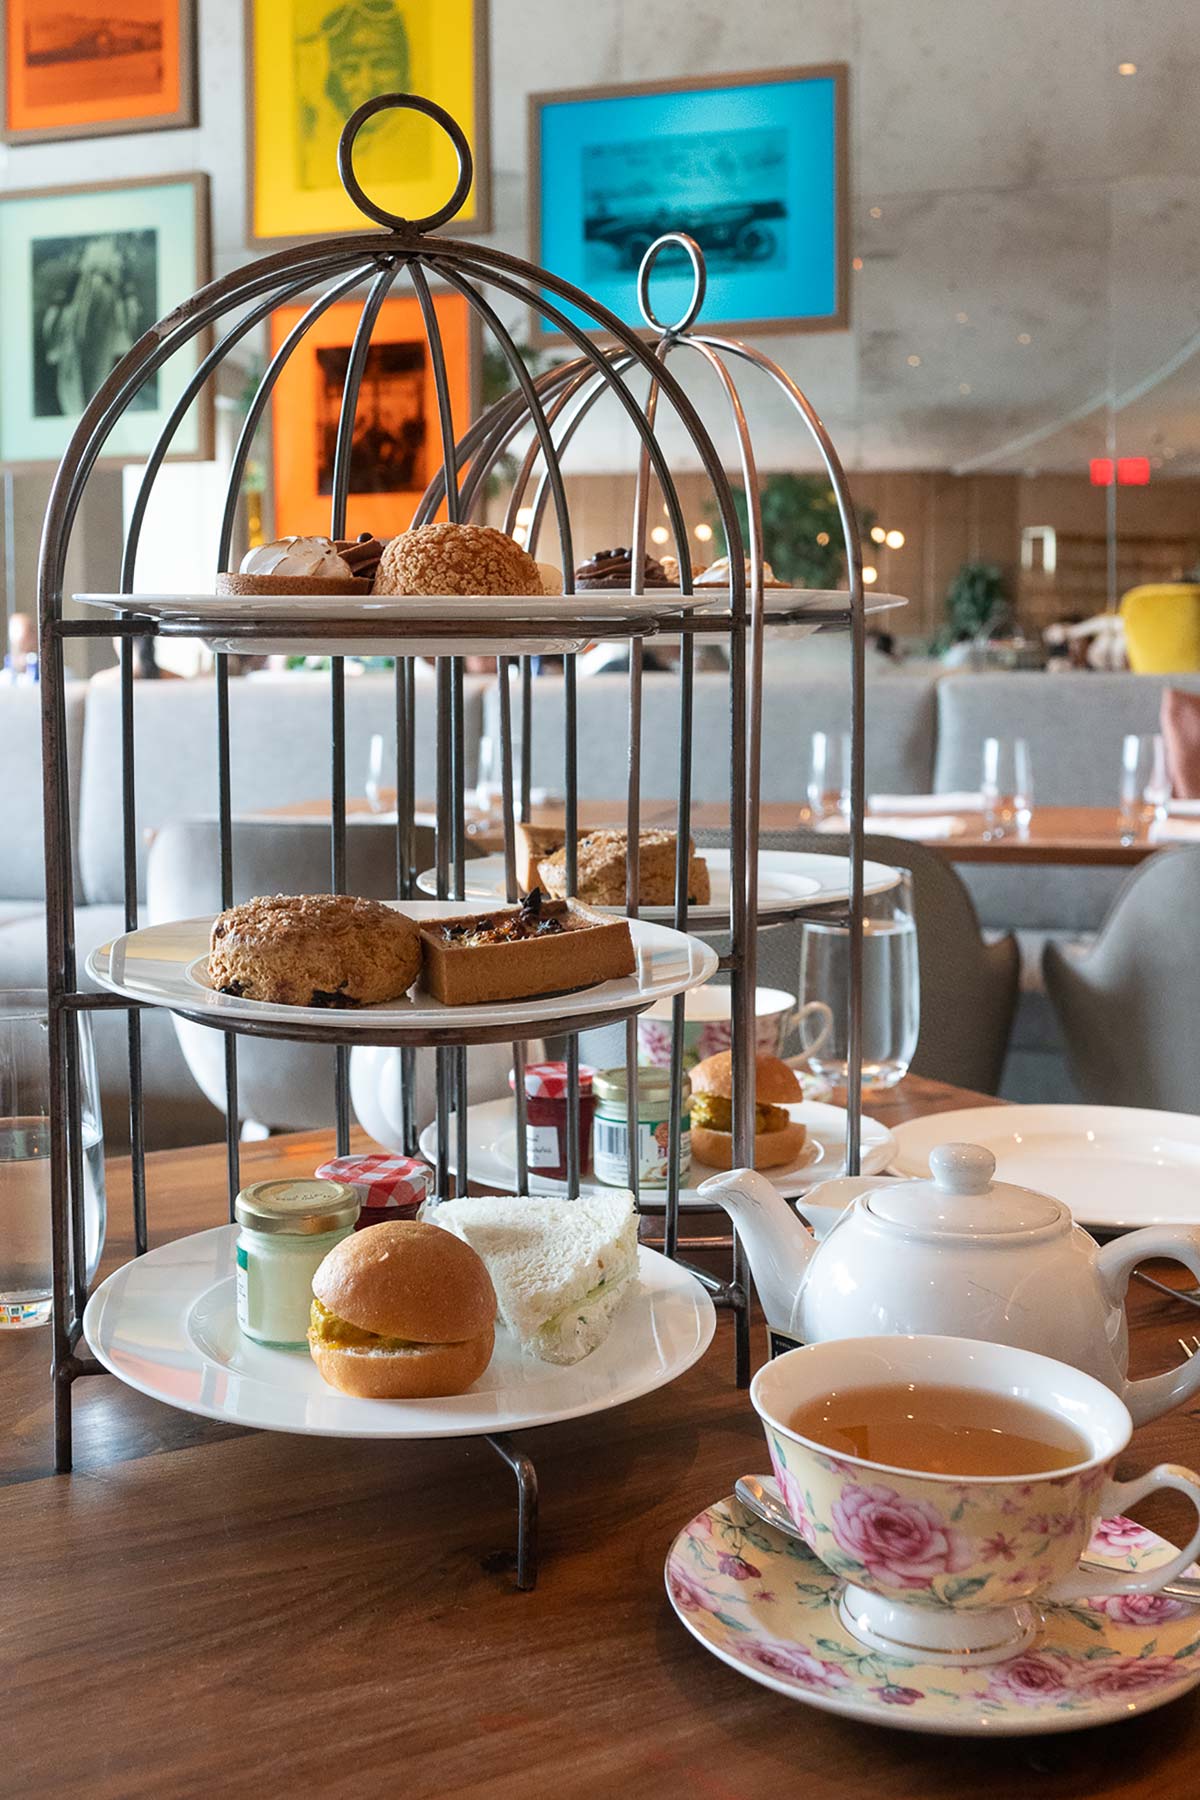 Afternoon tea service with 3-tiered stand at Bluebird London NYC.